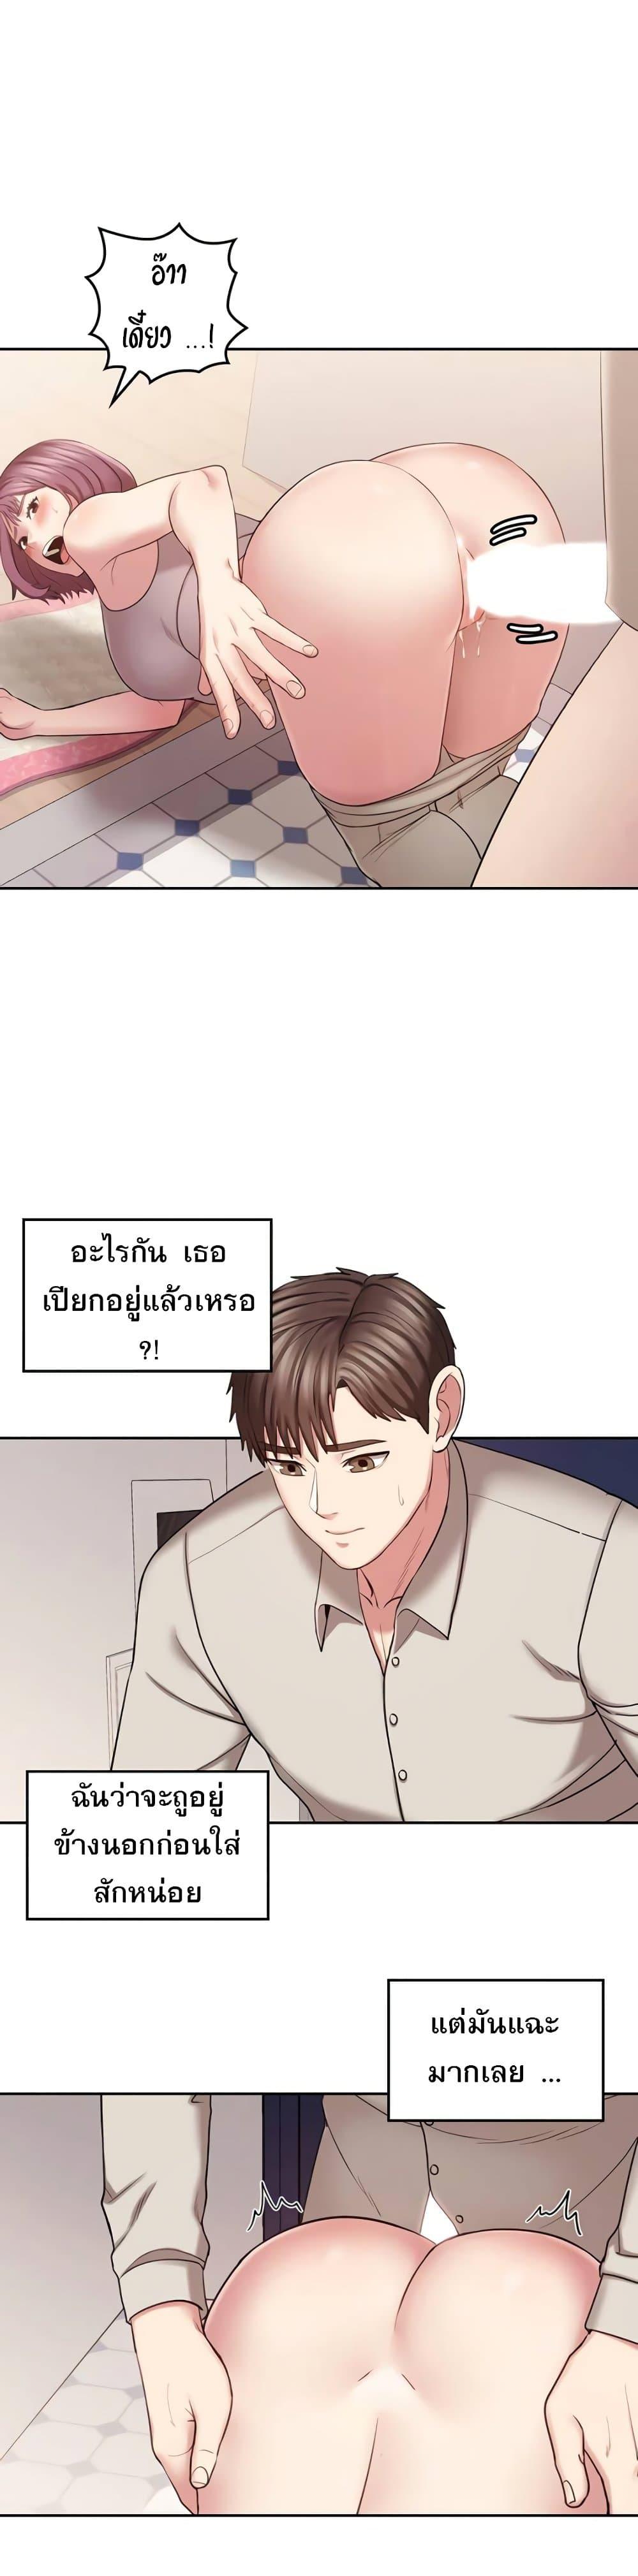 Sexual Consulting 2 ภาพ 28